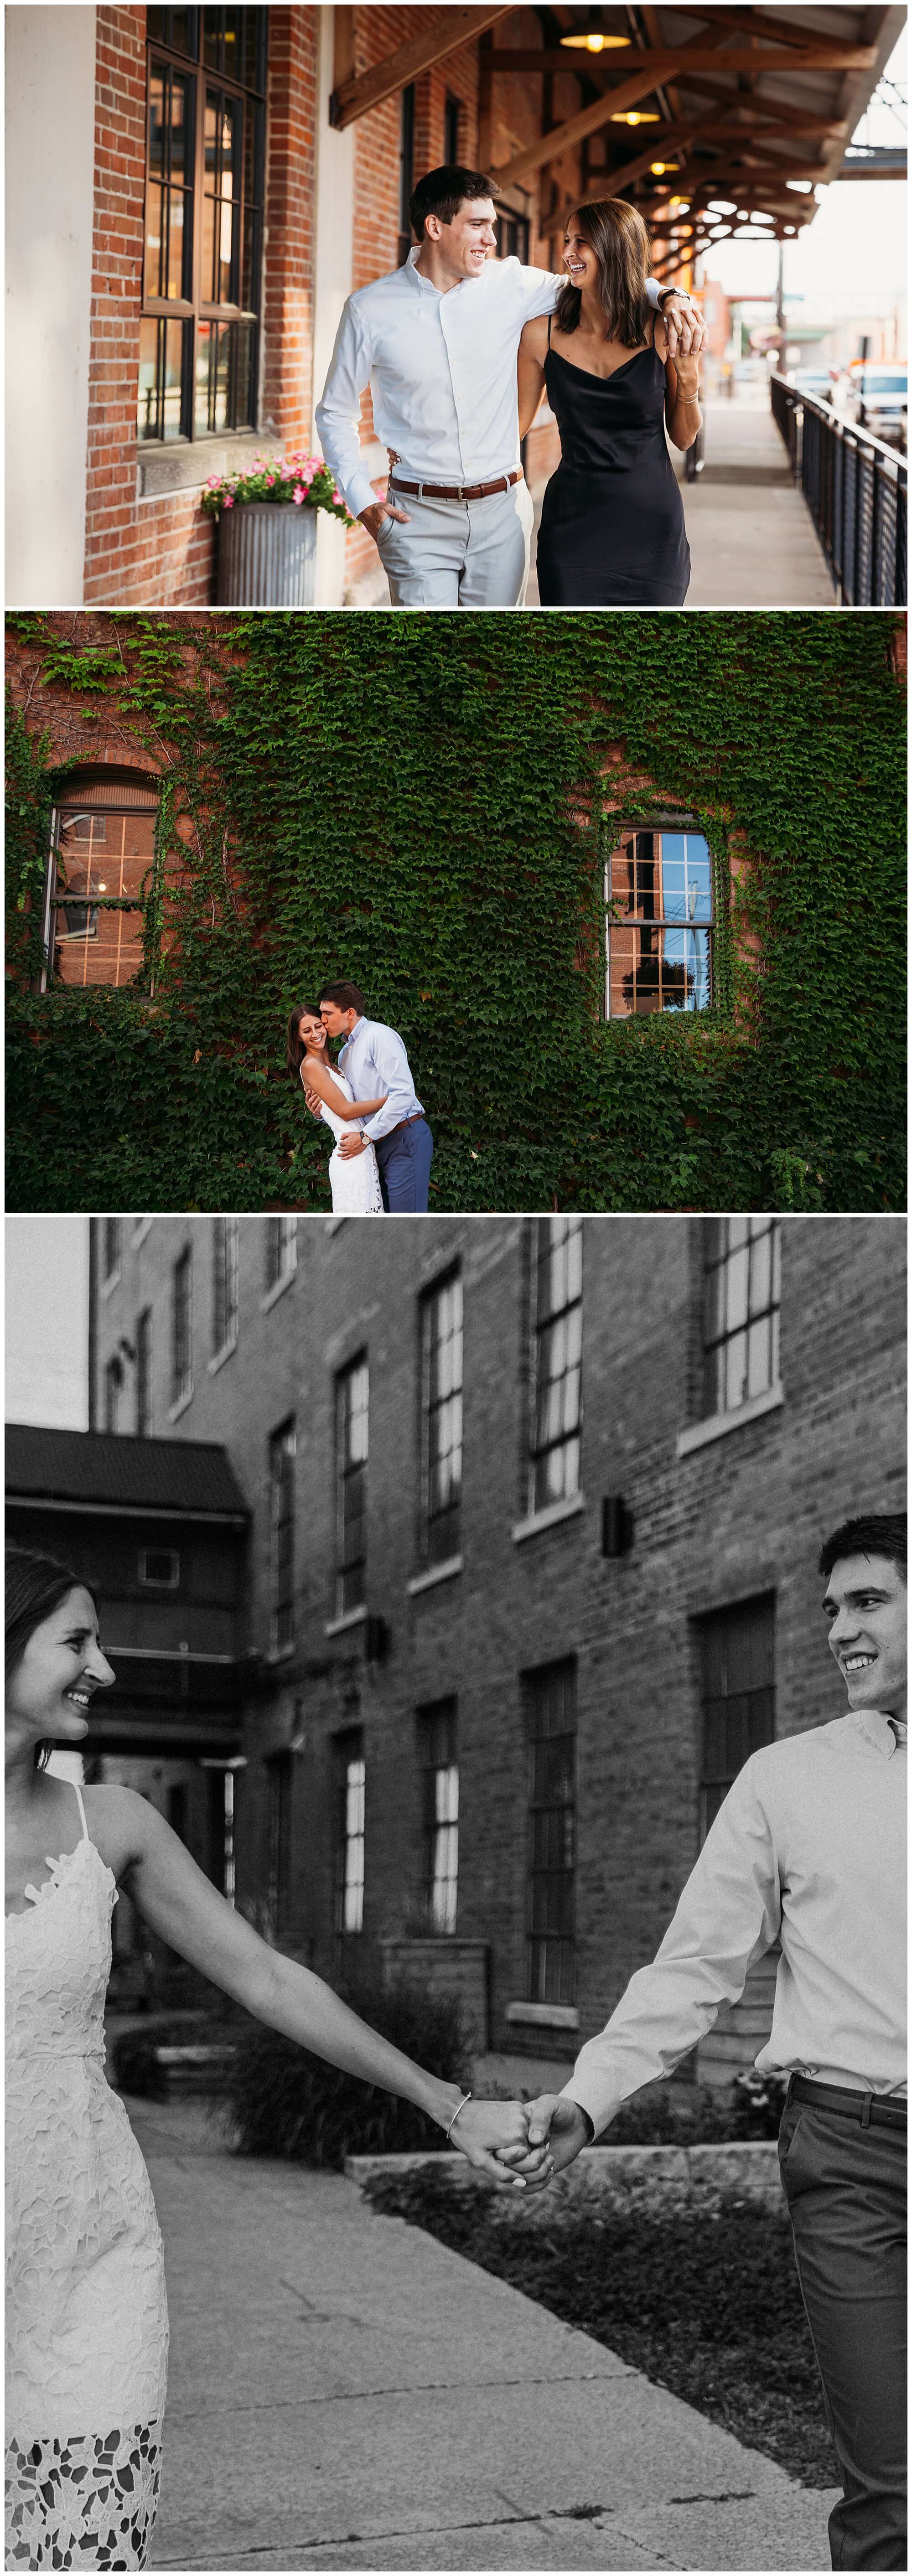 couple walking together during Dubuque Millwork District engagement session